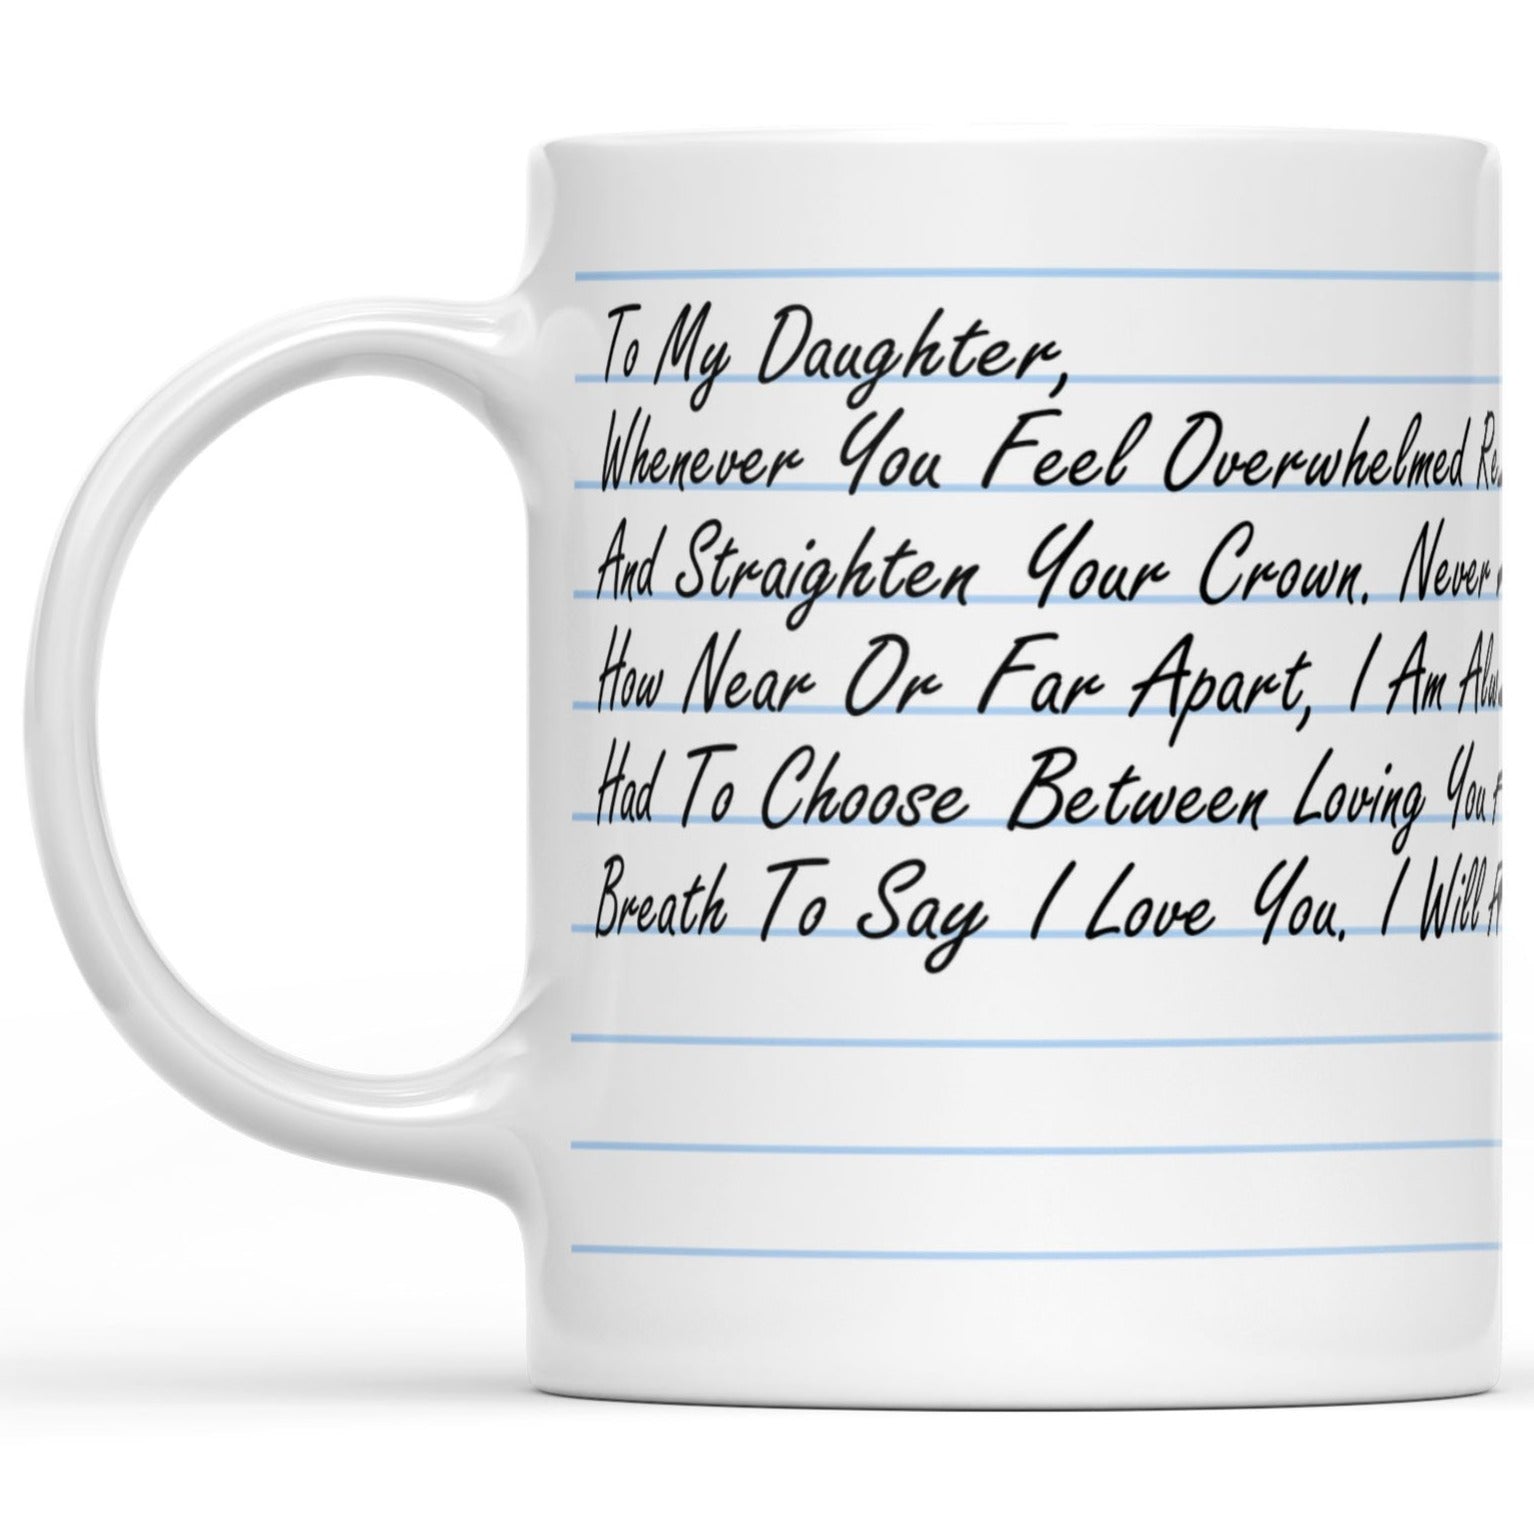 Custom Love Letter Message for Daughter from Dad Mug, Personalized Gift Mug for Daughter